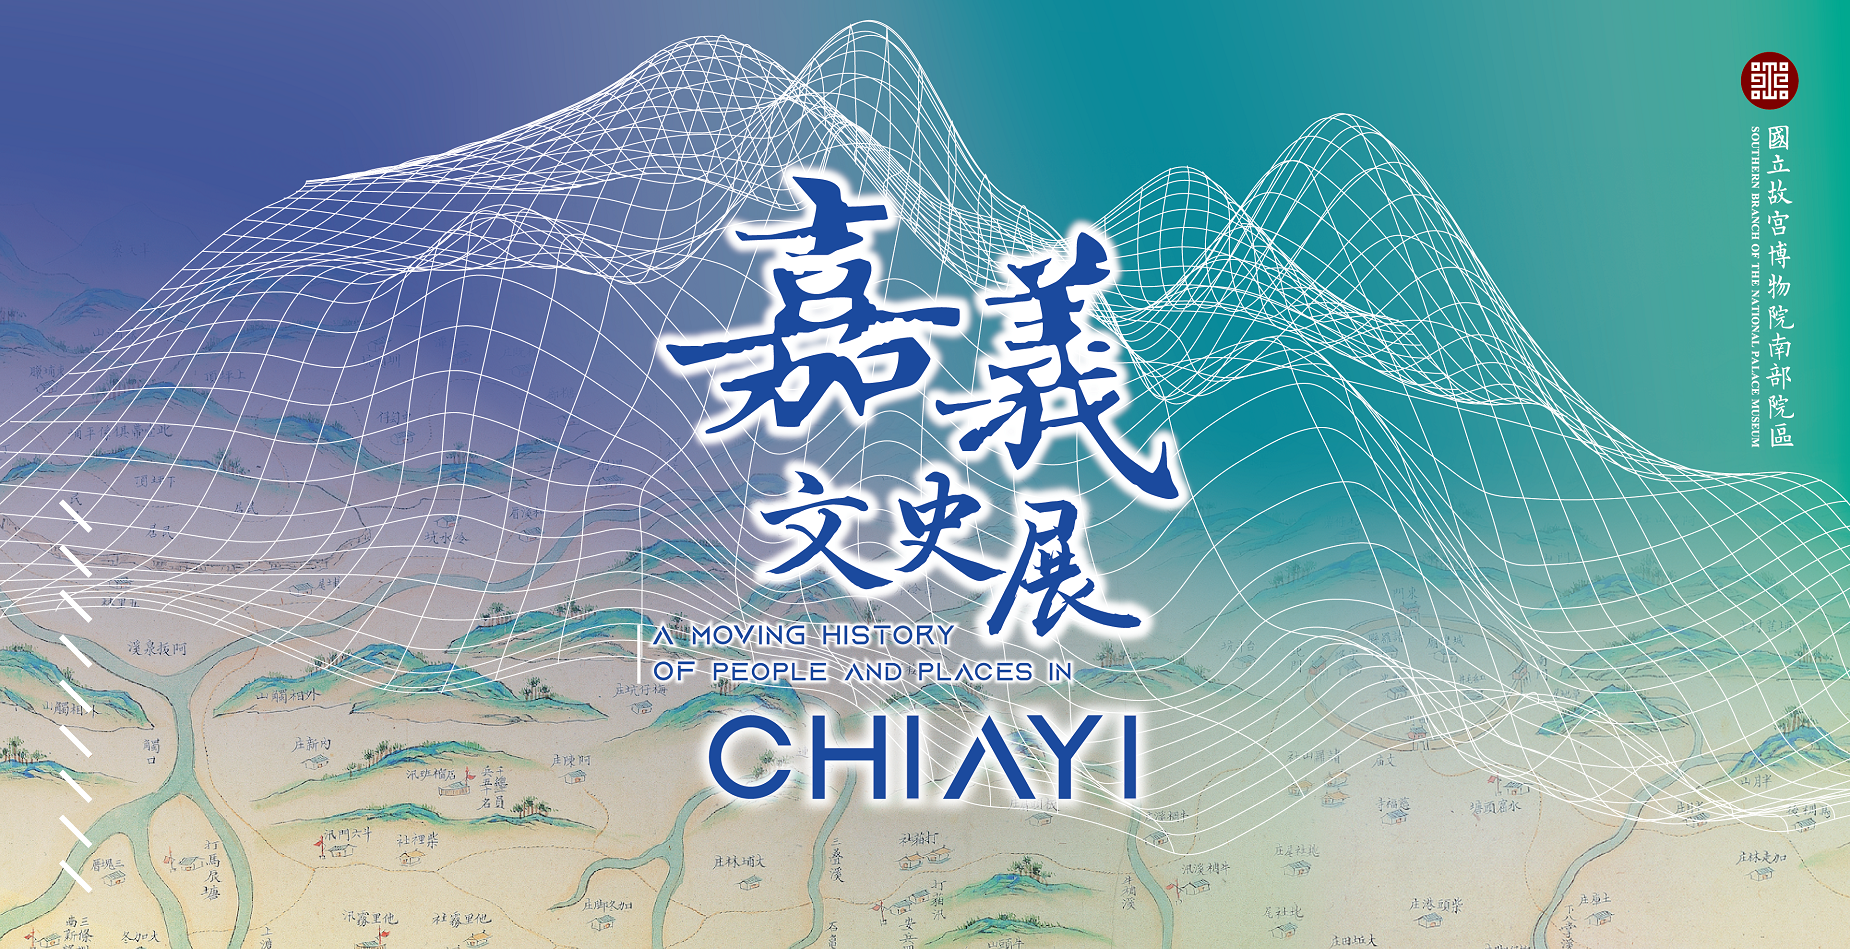 A Moving History of People and Place in Chiayi